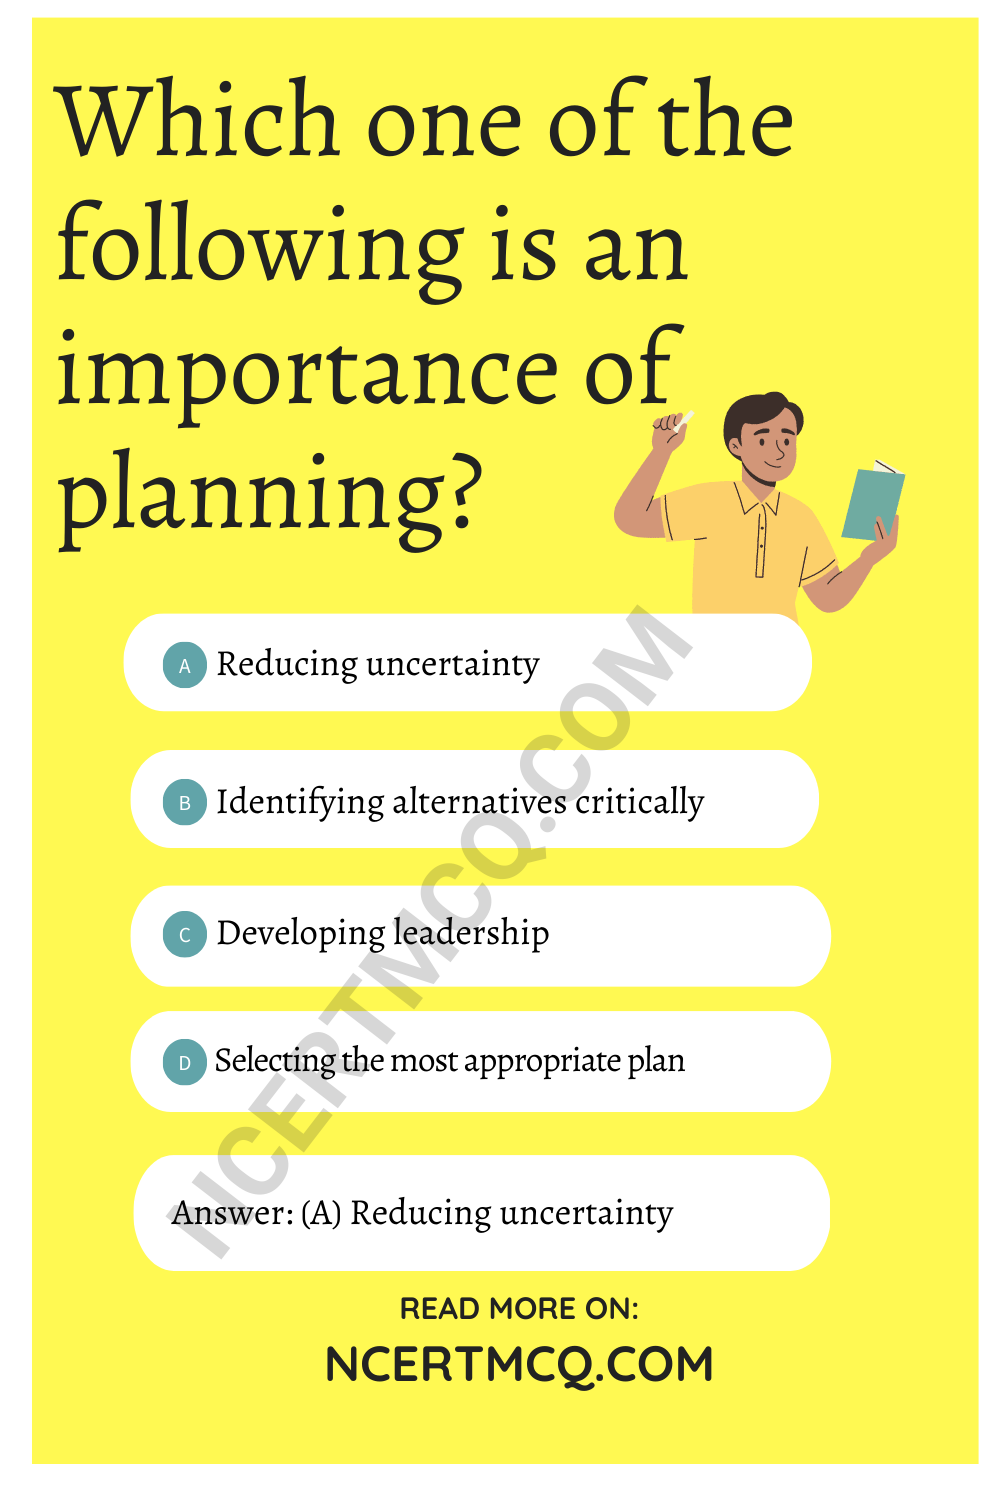 Which one of the following is an importance of planning?